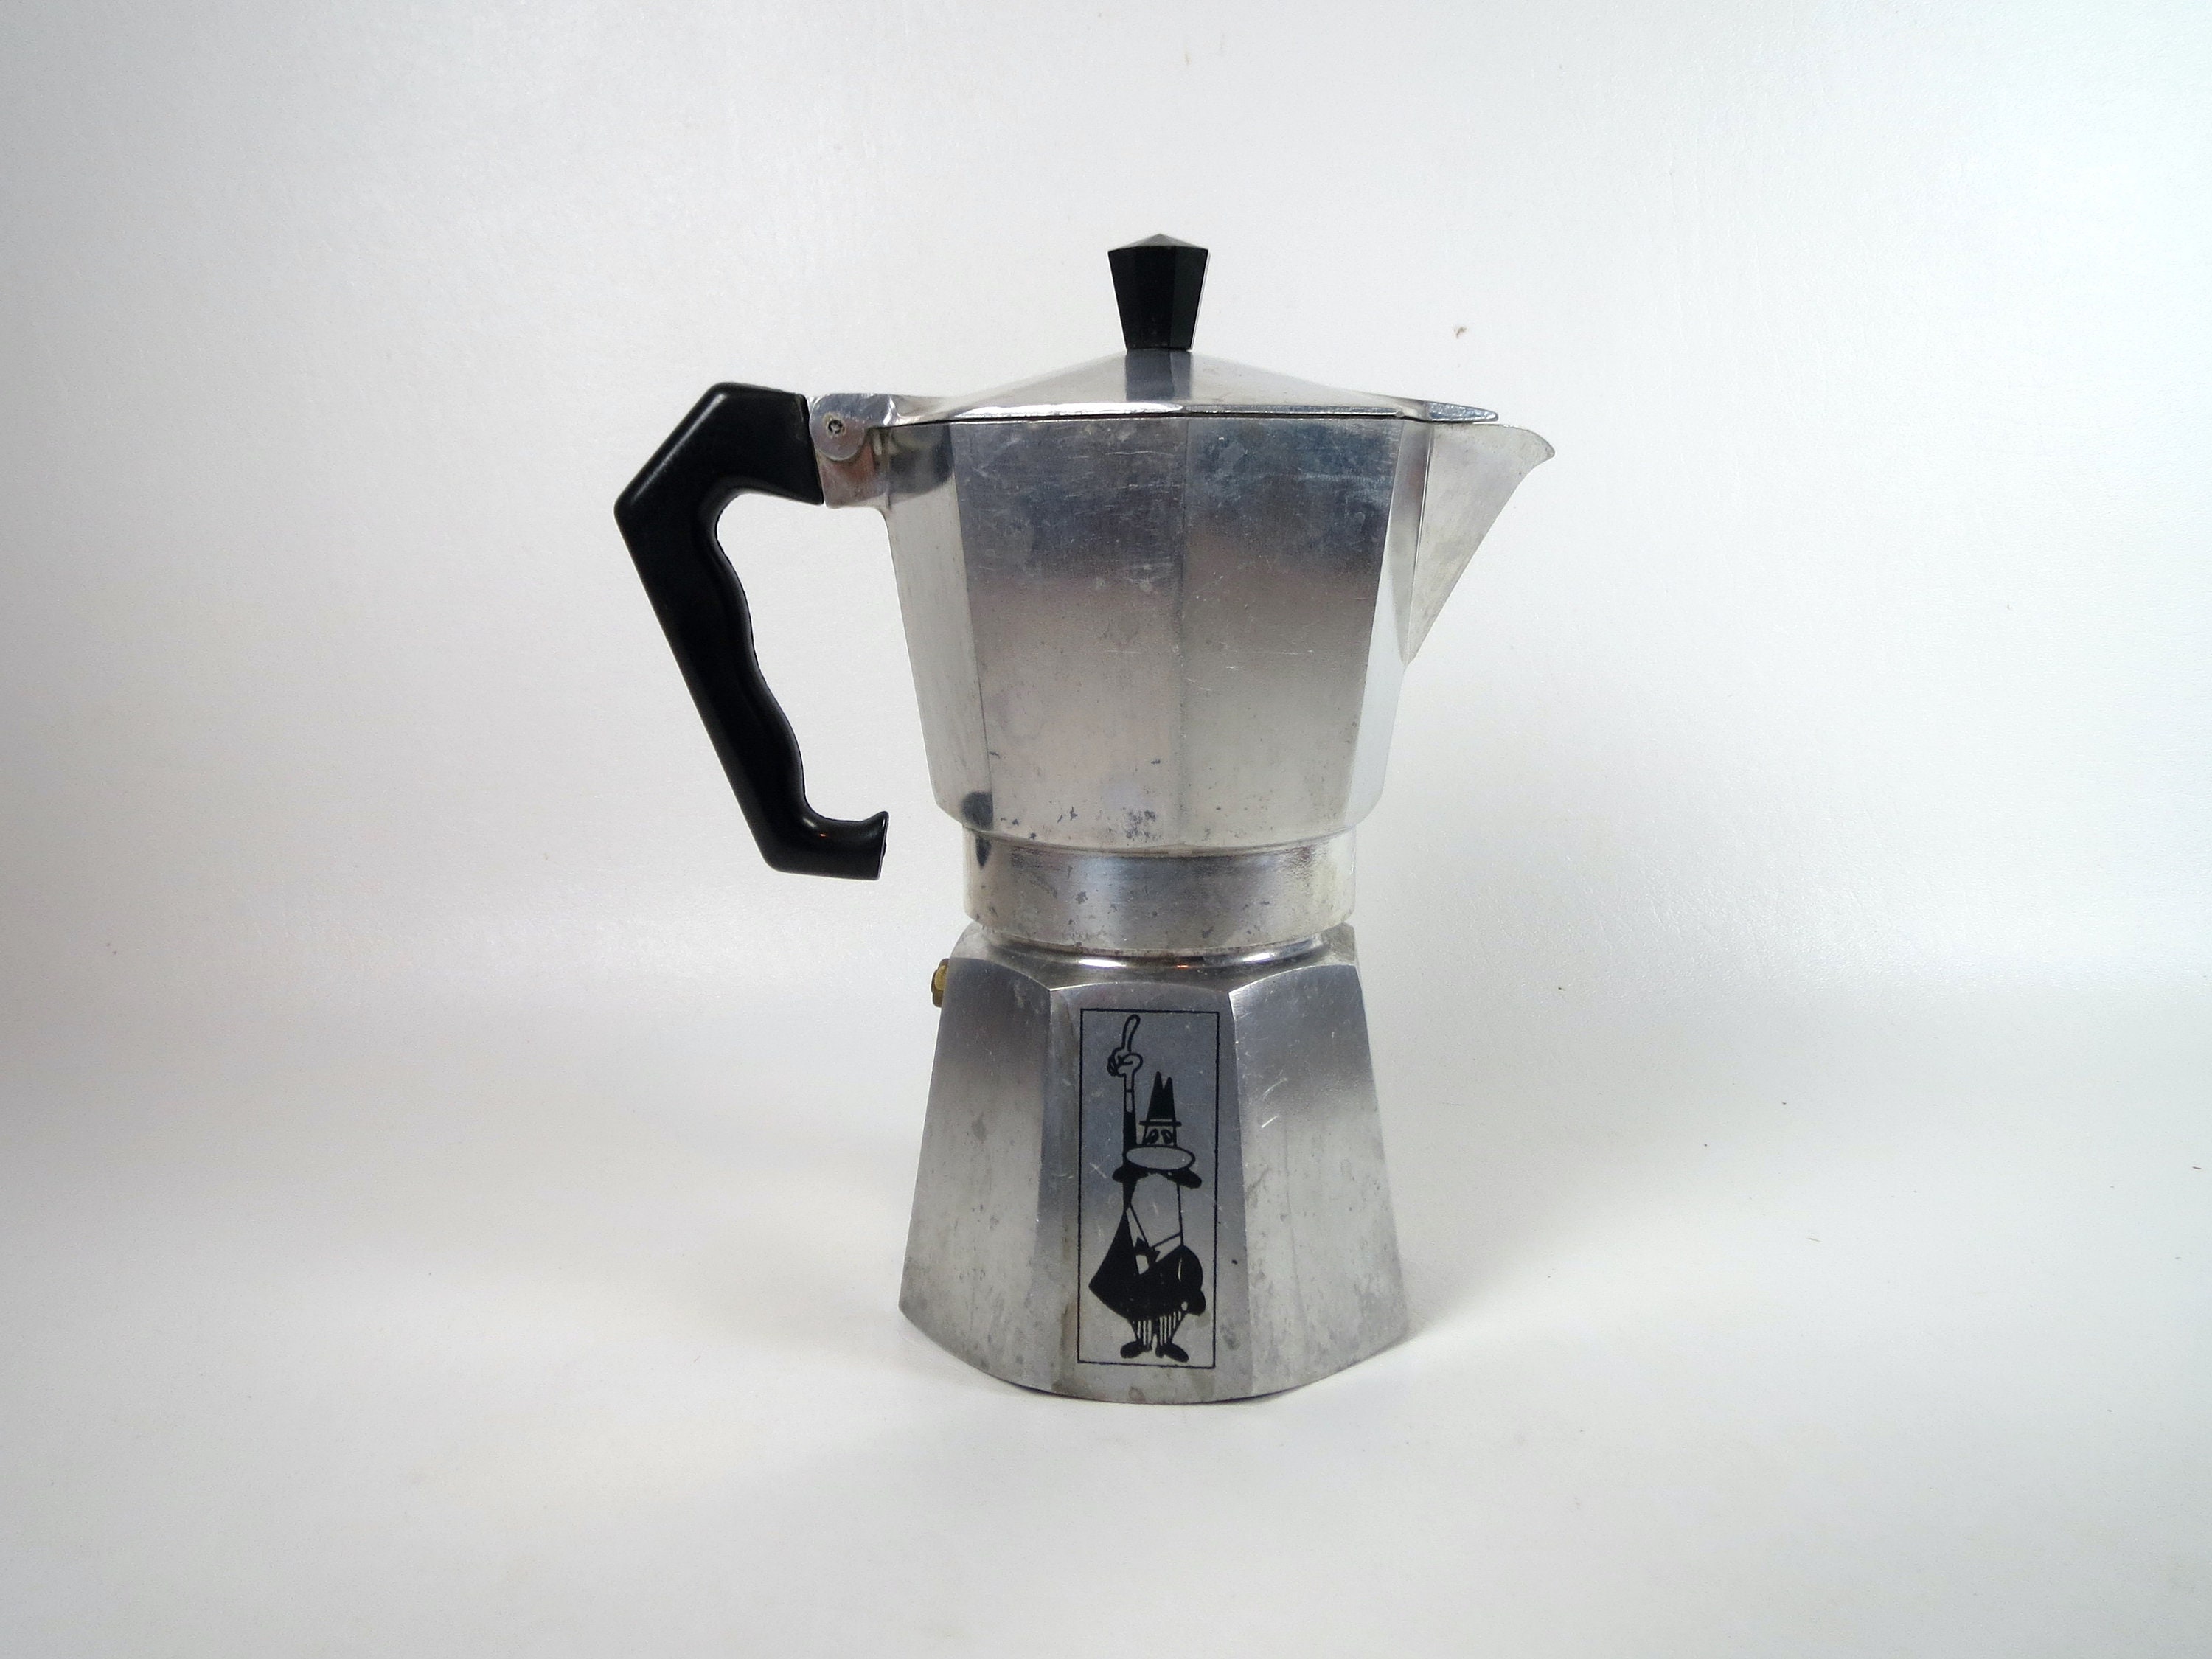 Vintage Bialetti Espresso Stove Top Aluminum Moka Pot Made in Italy Kitchen  & Dining Decor Coffee Pot Espresso Makers Collectable 